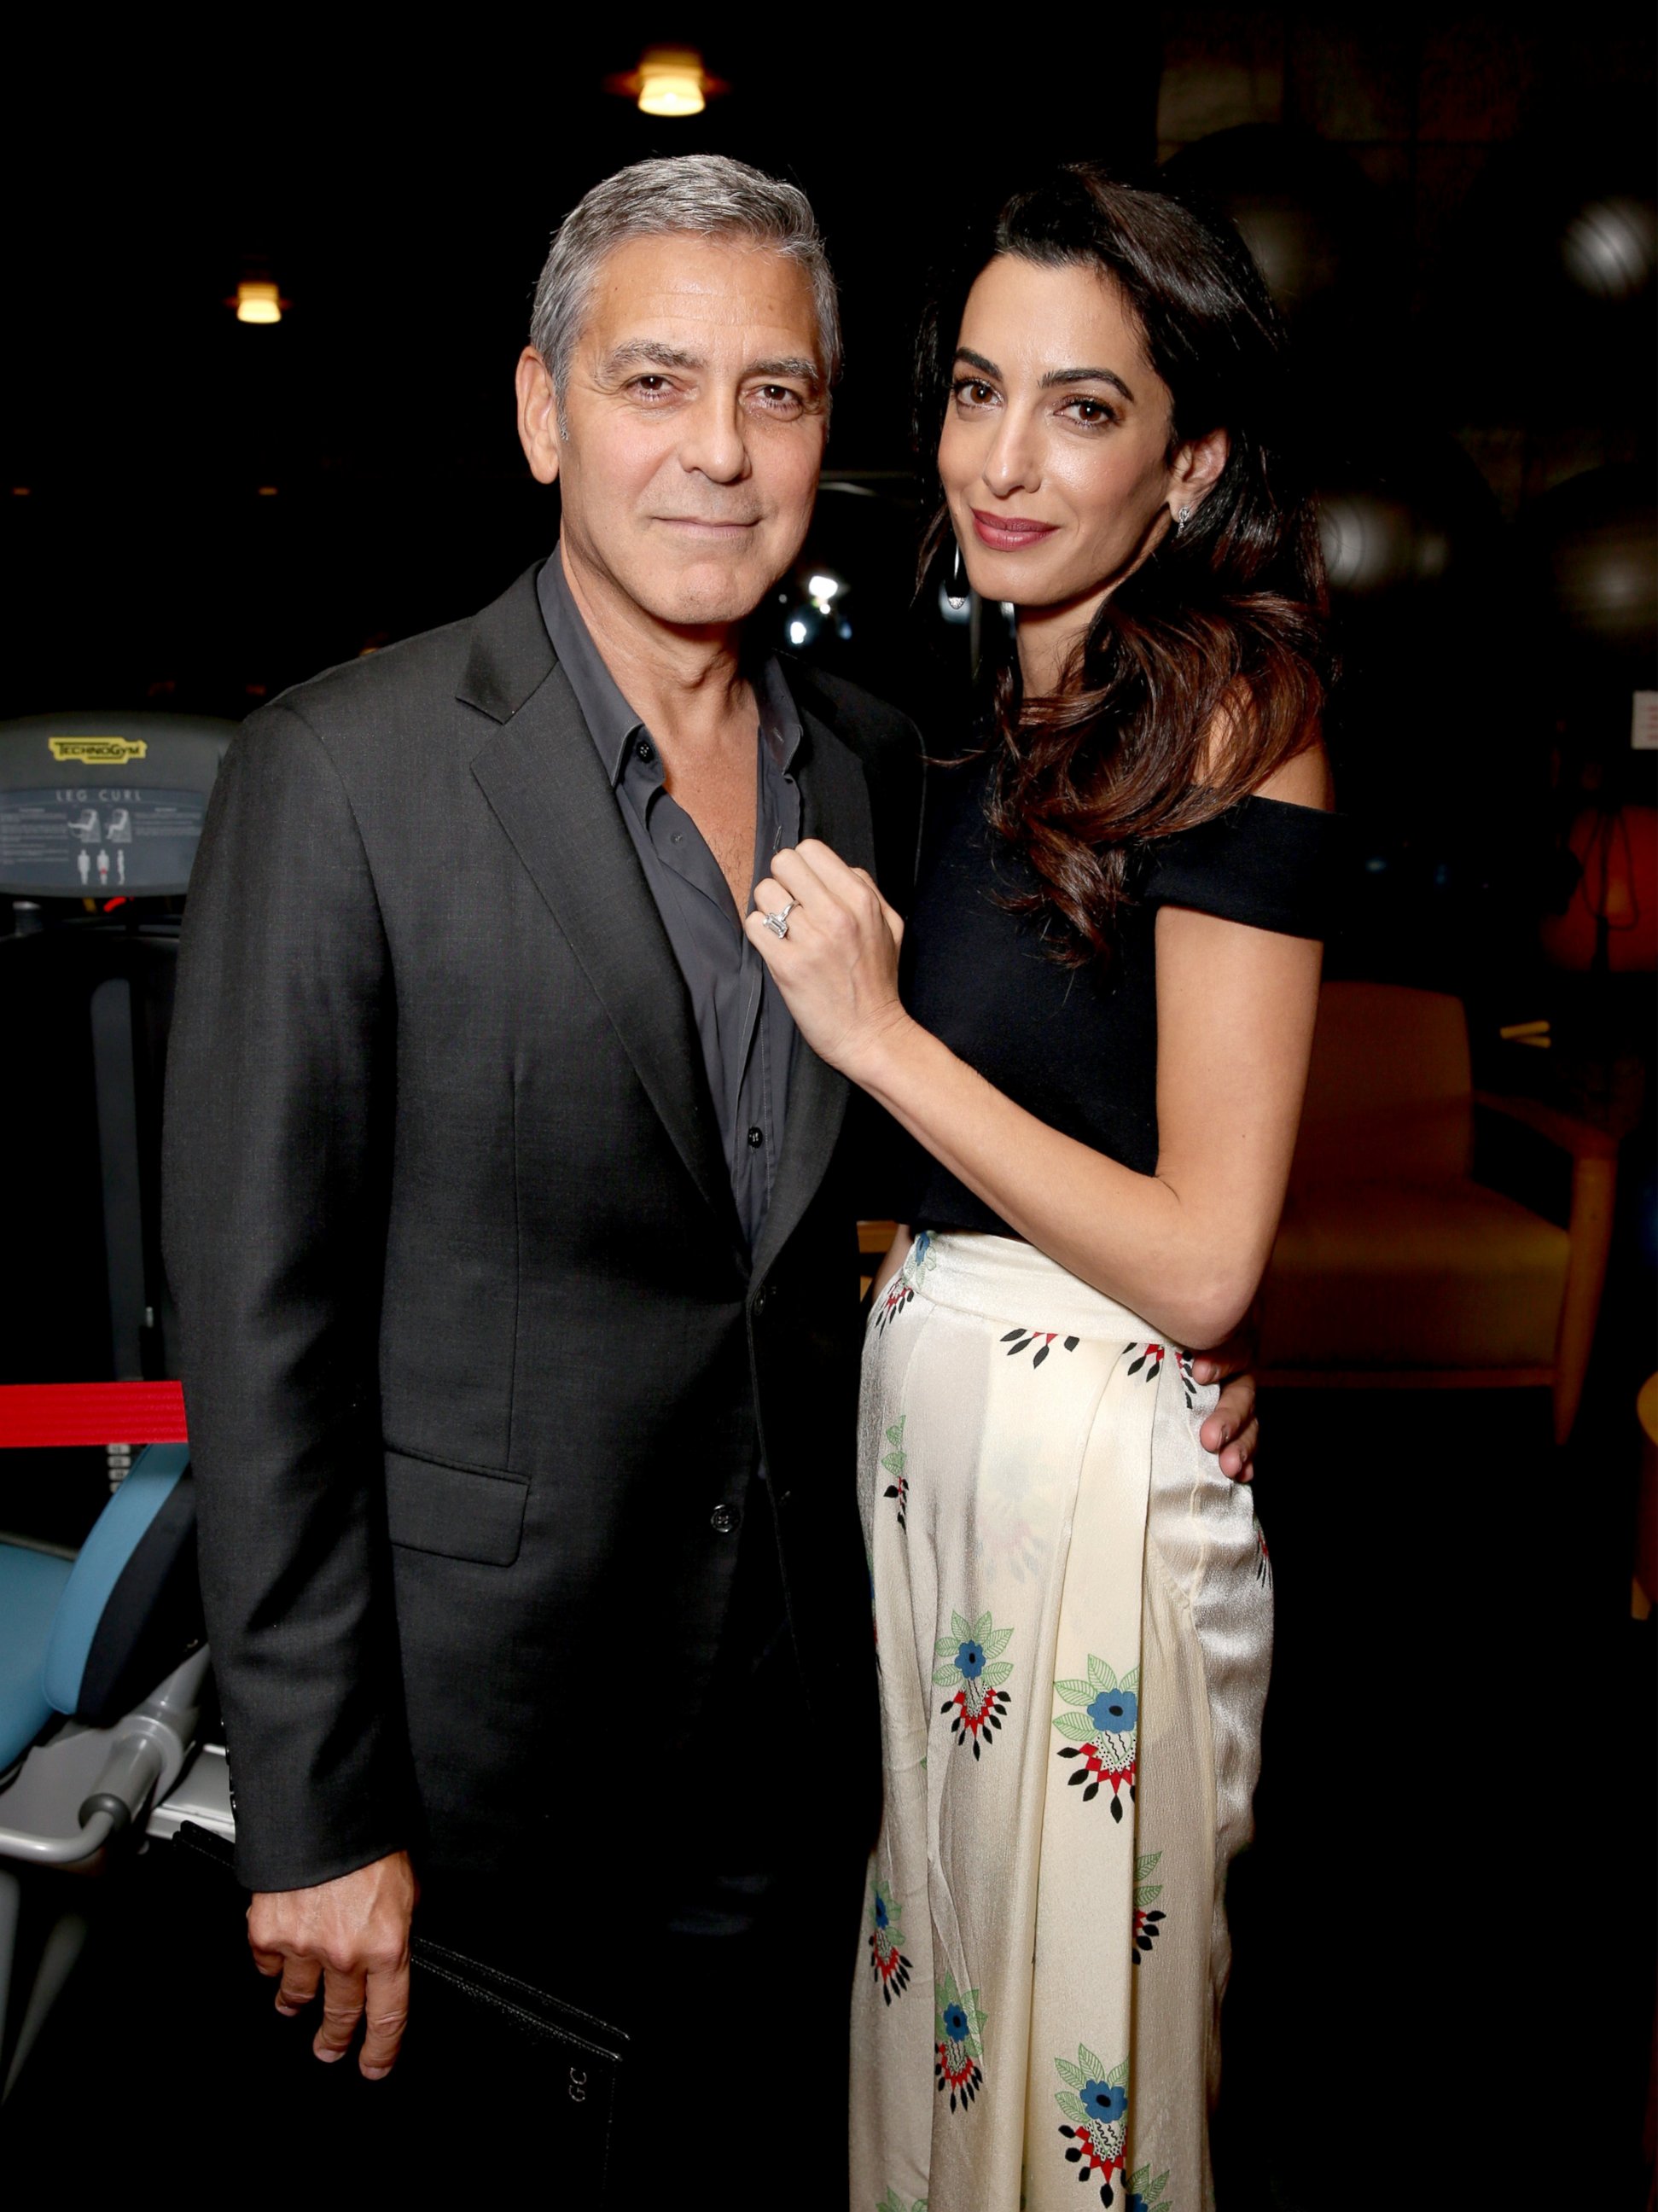 PHOTO: George Clooney and lawyer Amal Clooney attend the MPTF 95th anniversary celebration with "Hollywood's Night Under The Stars" at MPTF Wasserman Campus on Oct. 1, 2016 in Los Angeles.